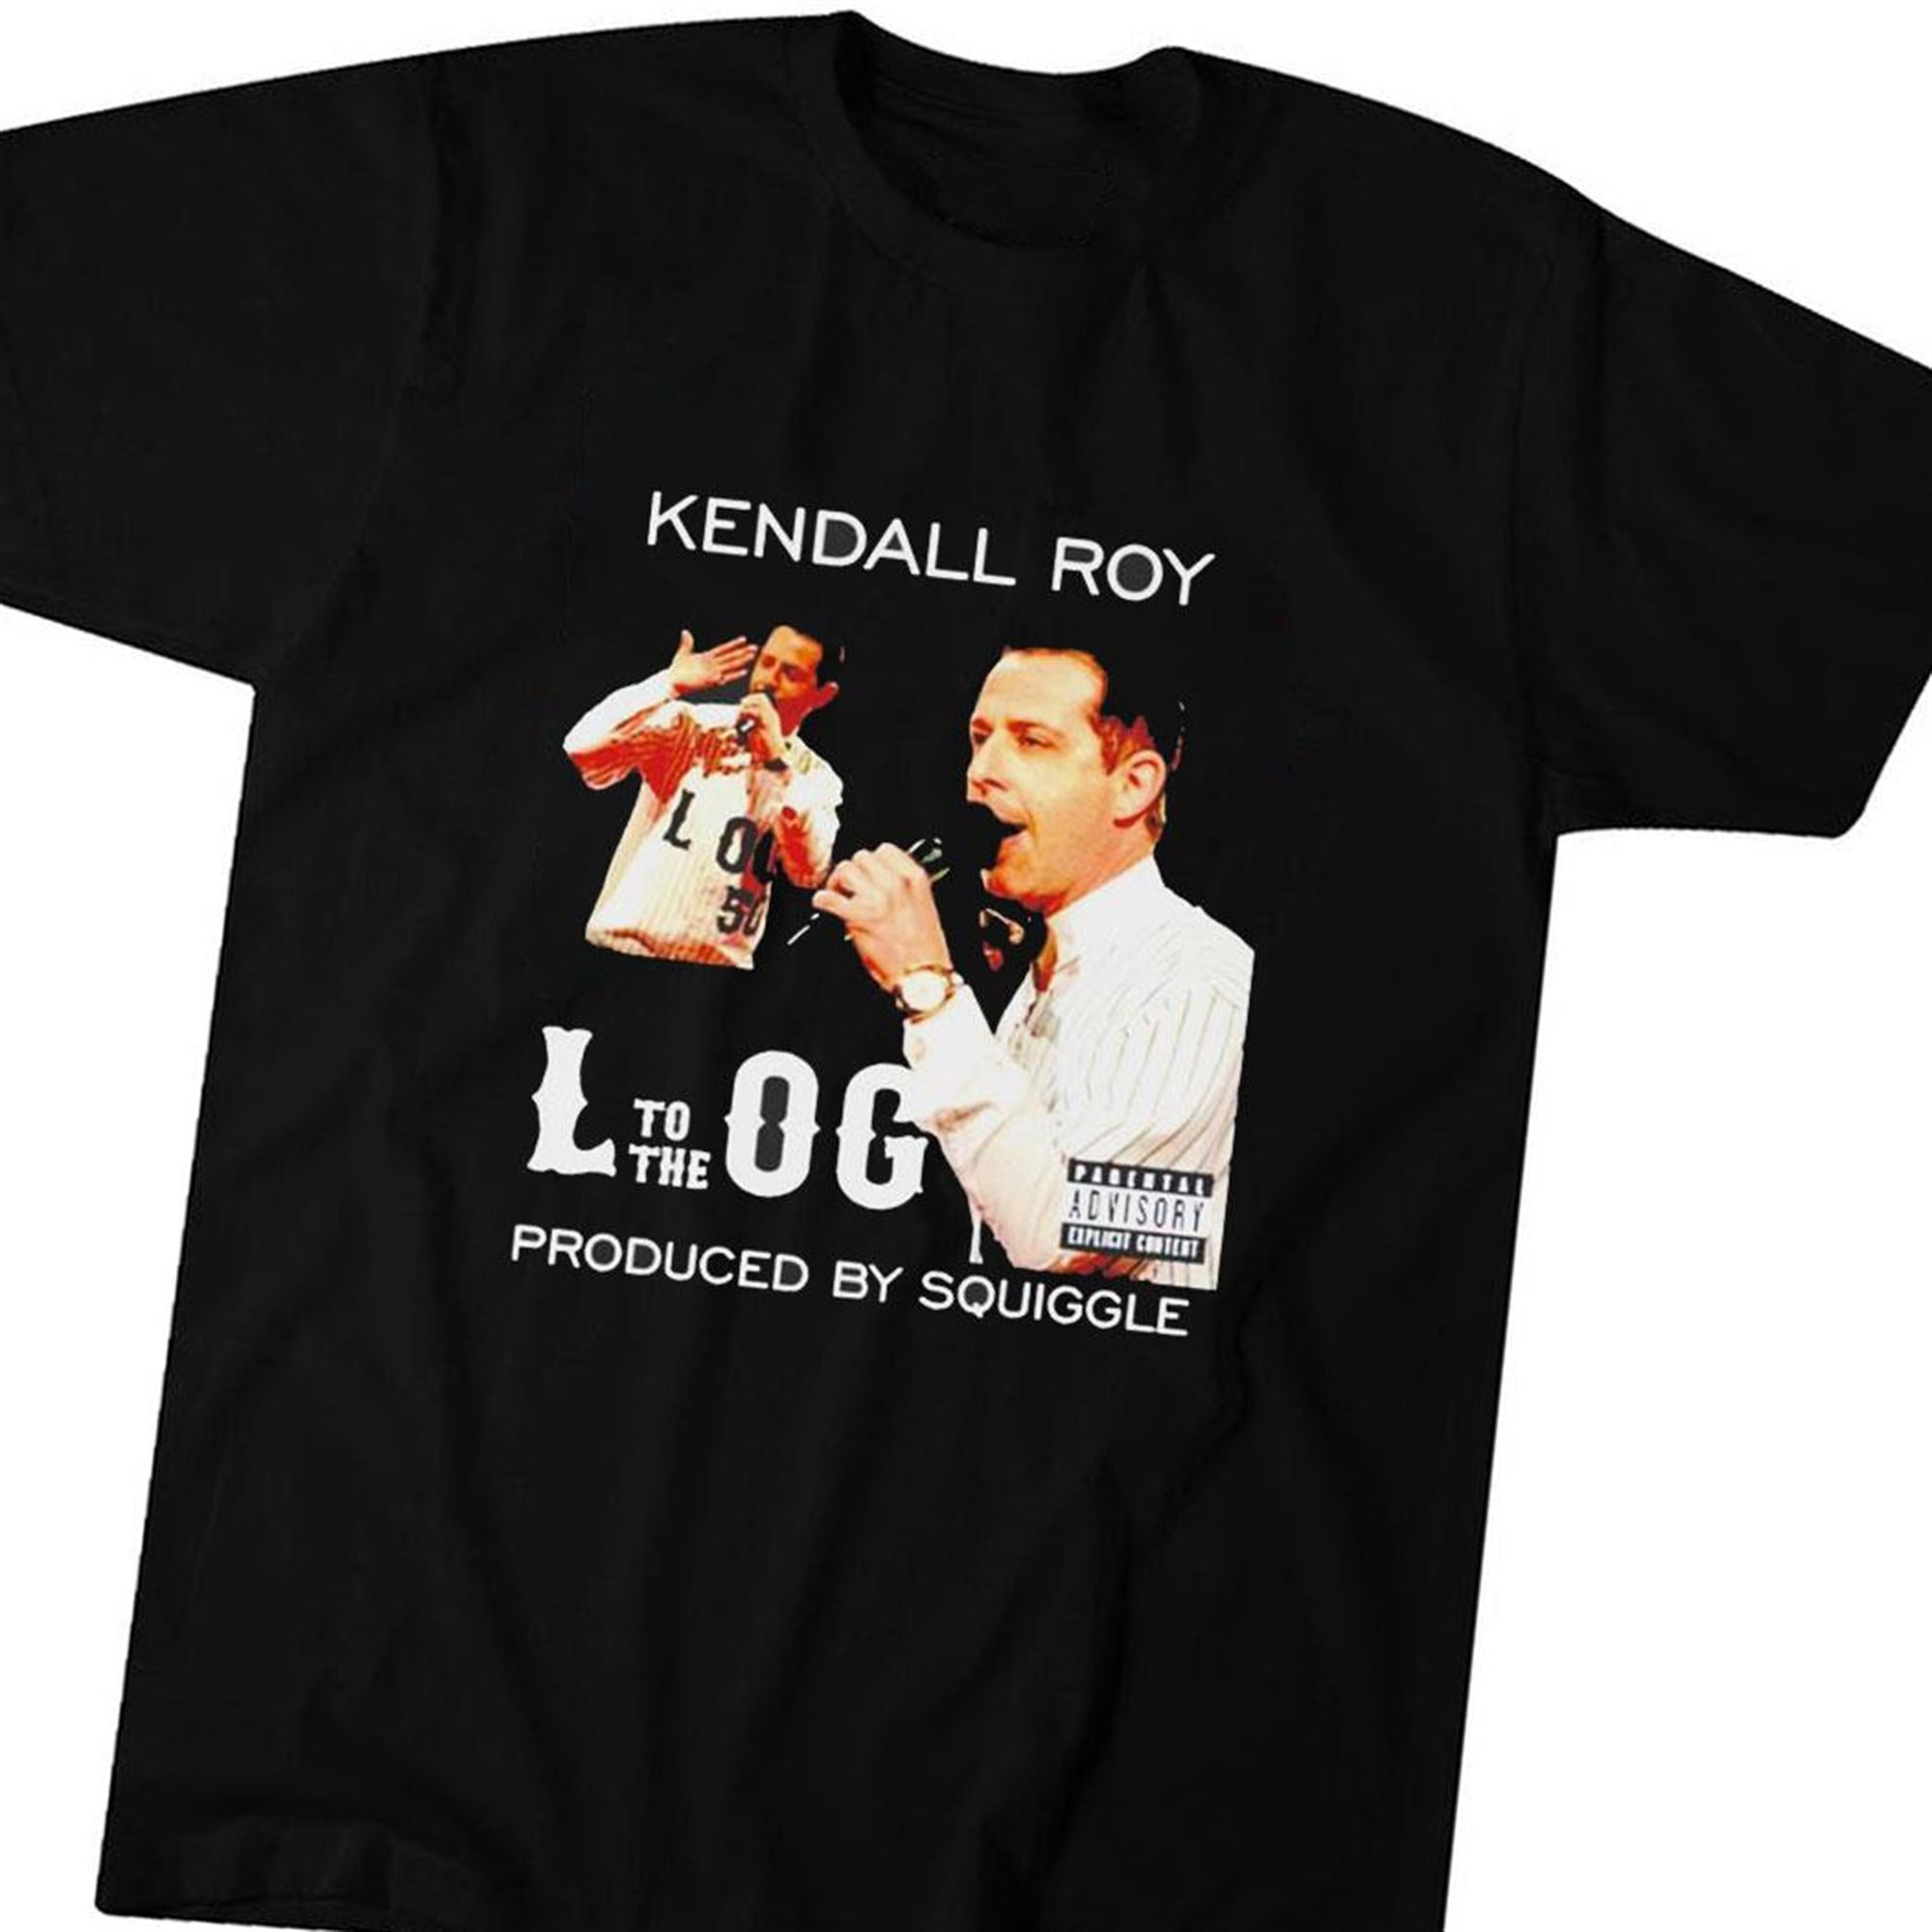 Kendall Roy Produced By Squiggle T-shirt